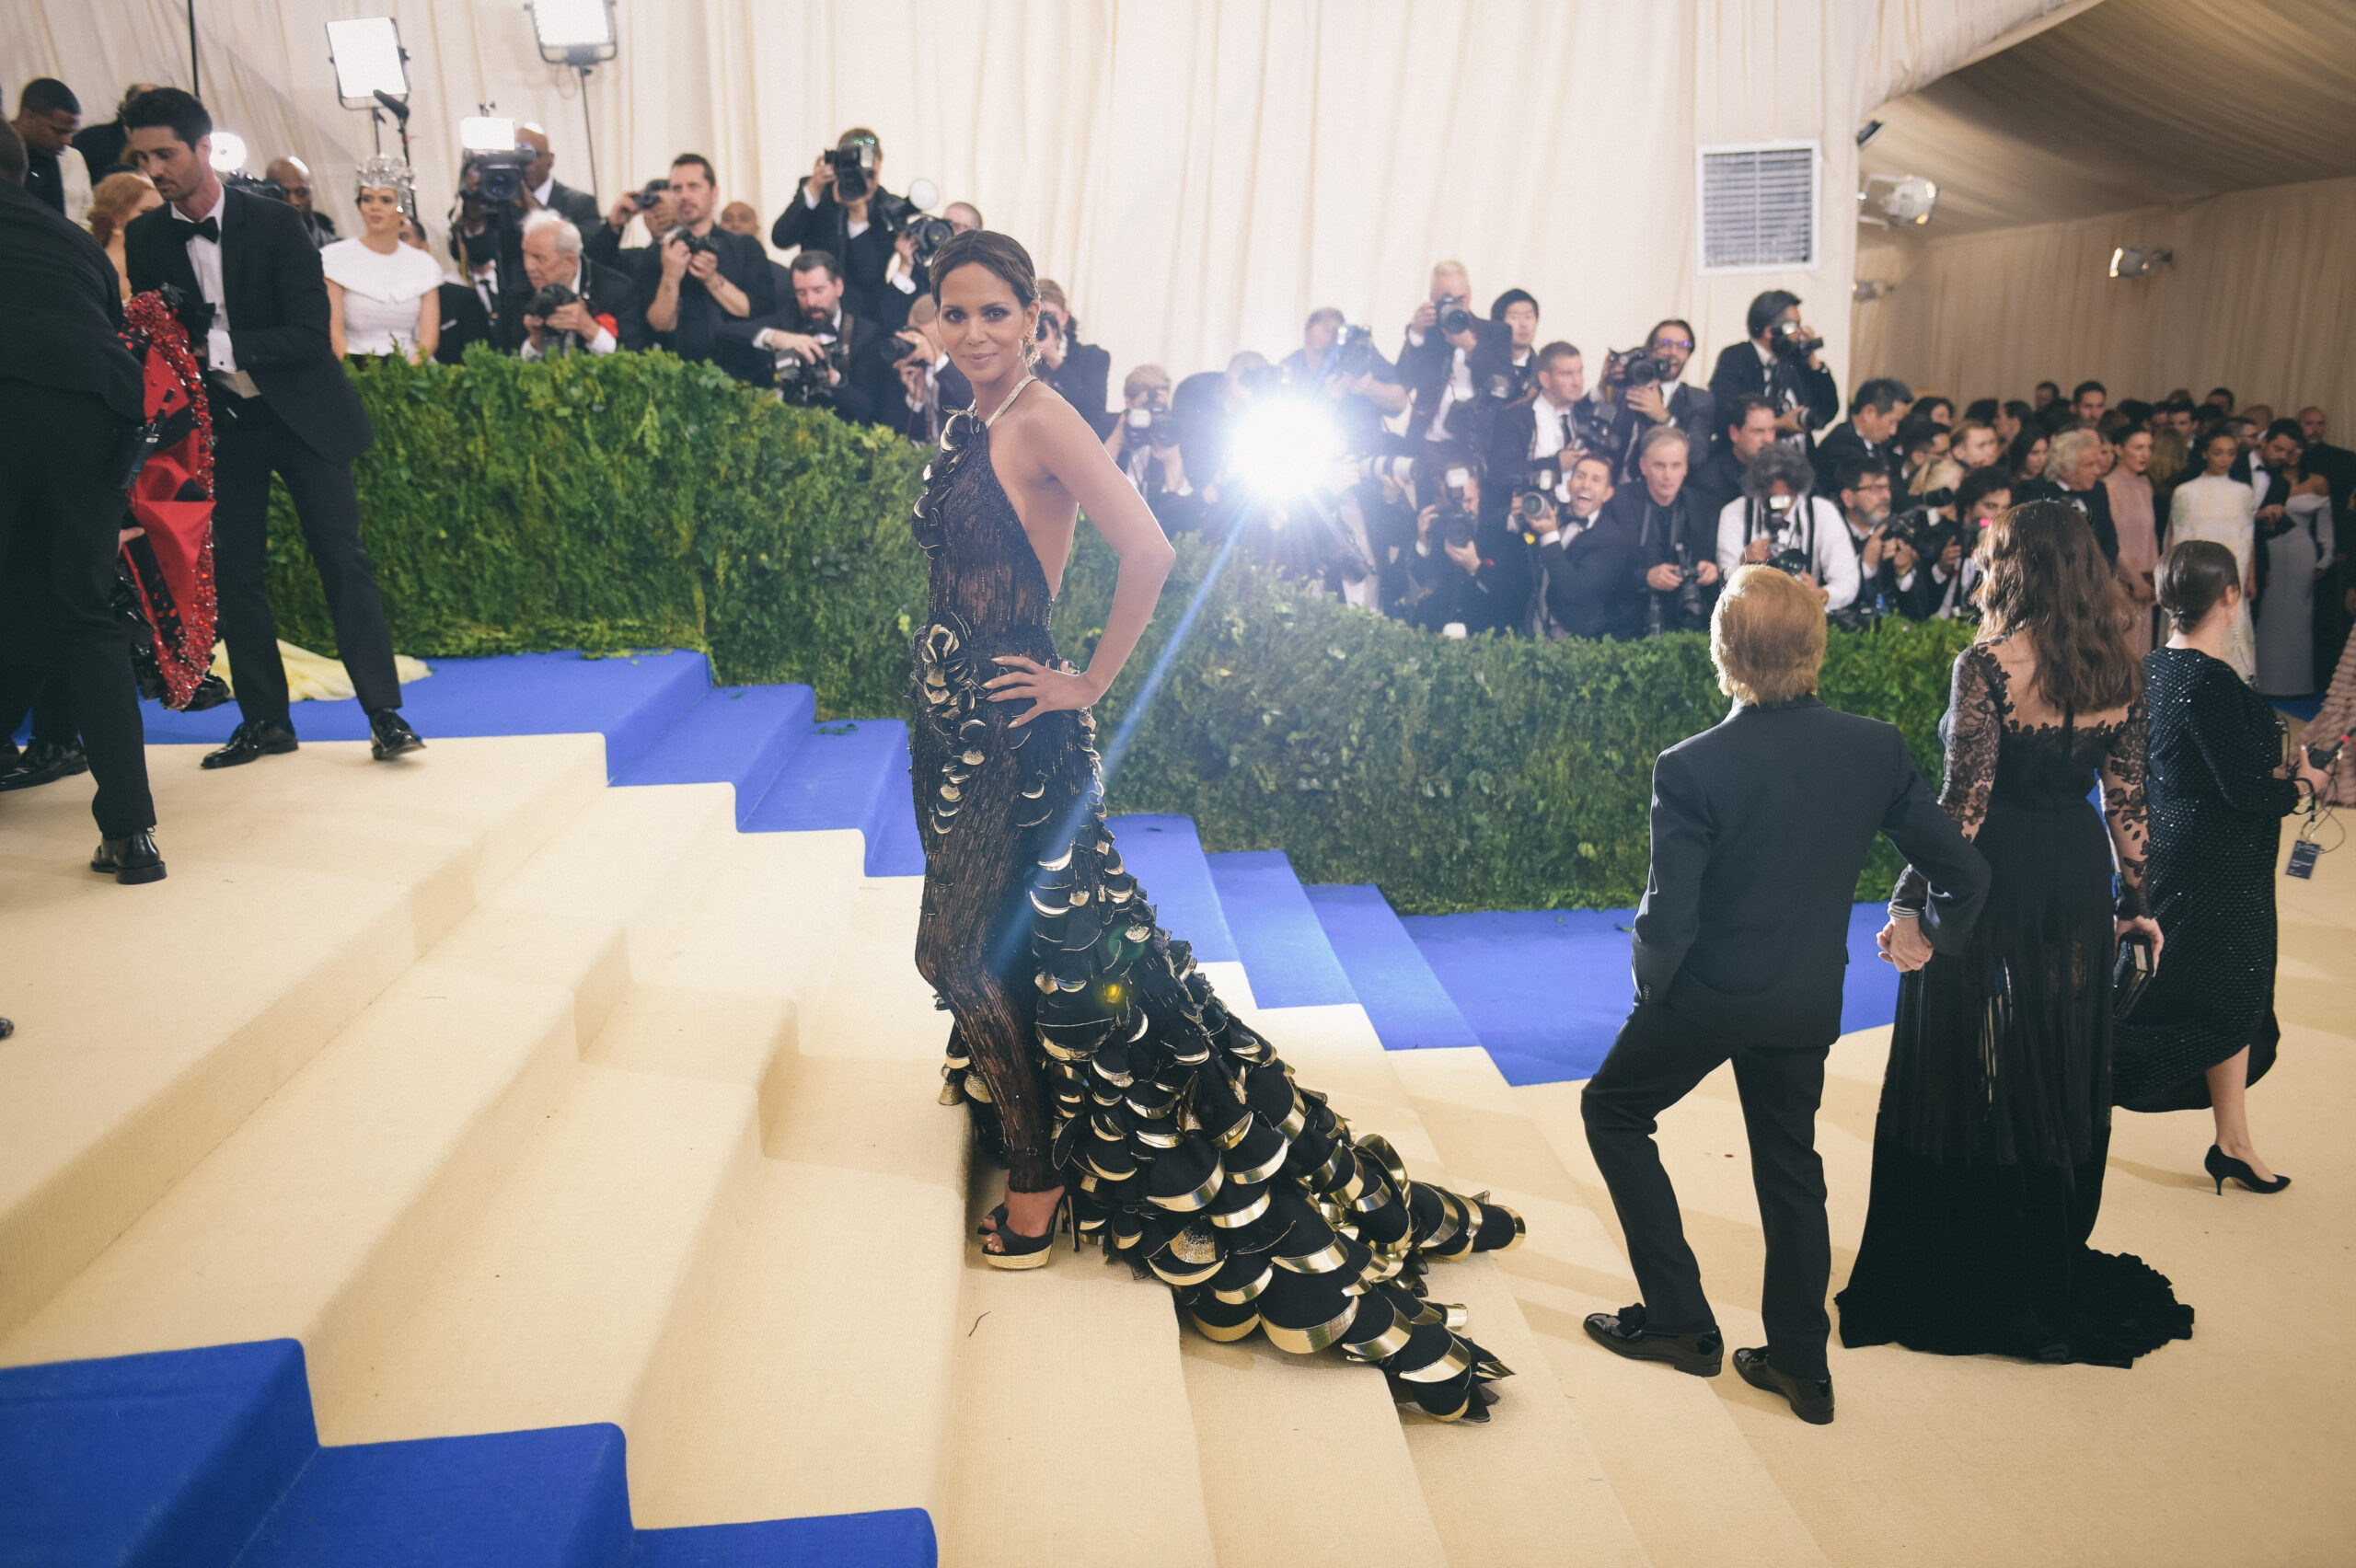 NEW YORK, NY - MAY 01:  Halle Berry attends the "Rei Kawakubo/Comme des Garcons: Art Of The In-Between" Costume Institute Gala at Metropolitan Museum of Art on May 1, 2017 in New York City.  (Photo by J. Kempin/Getty Images)